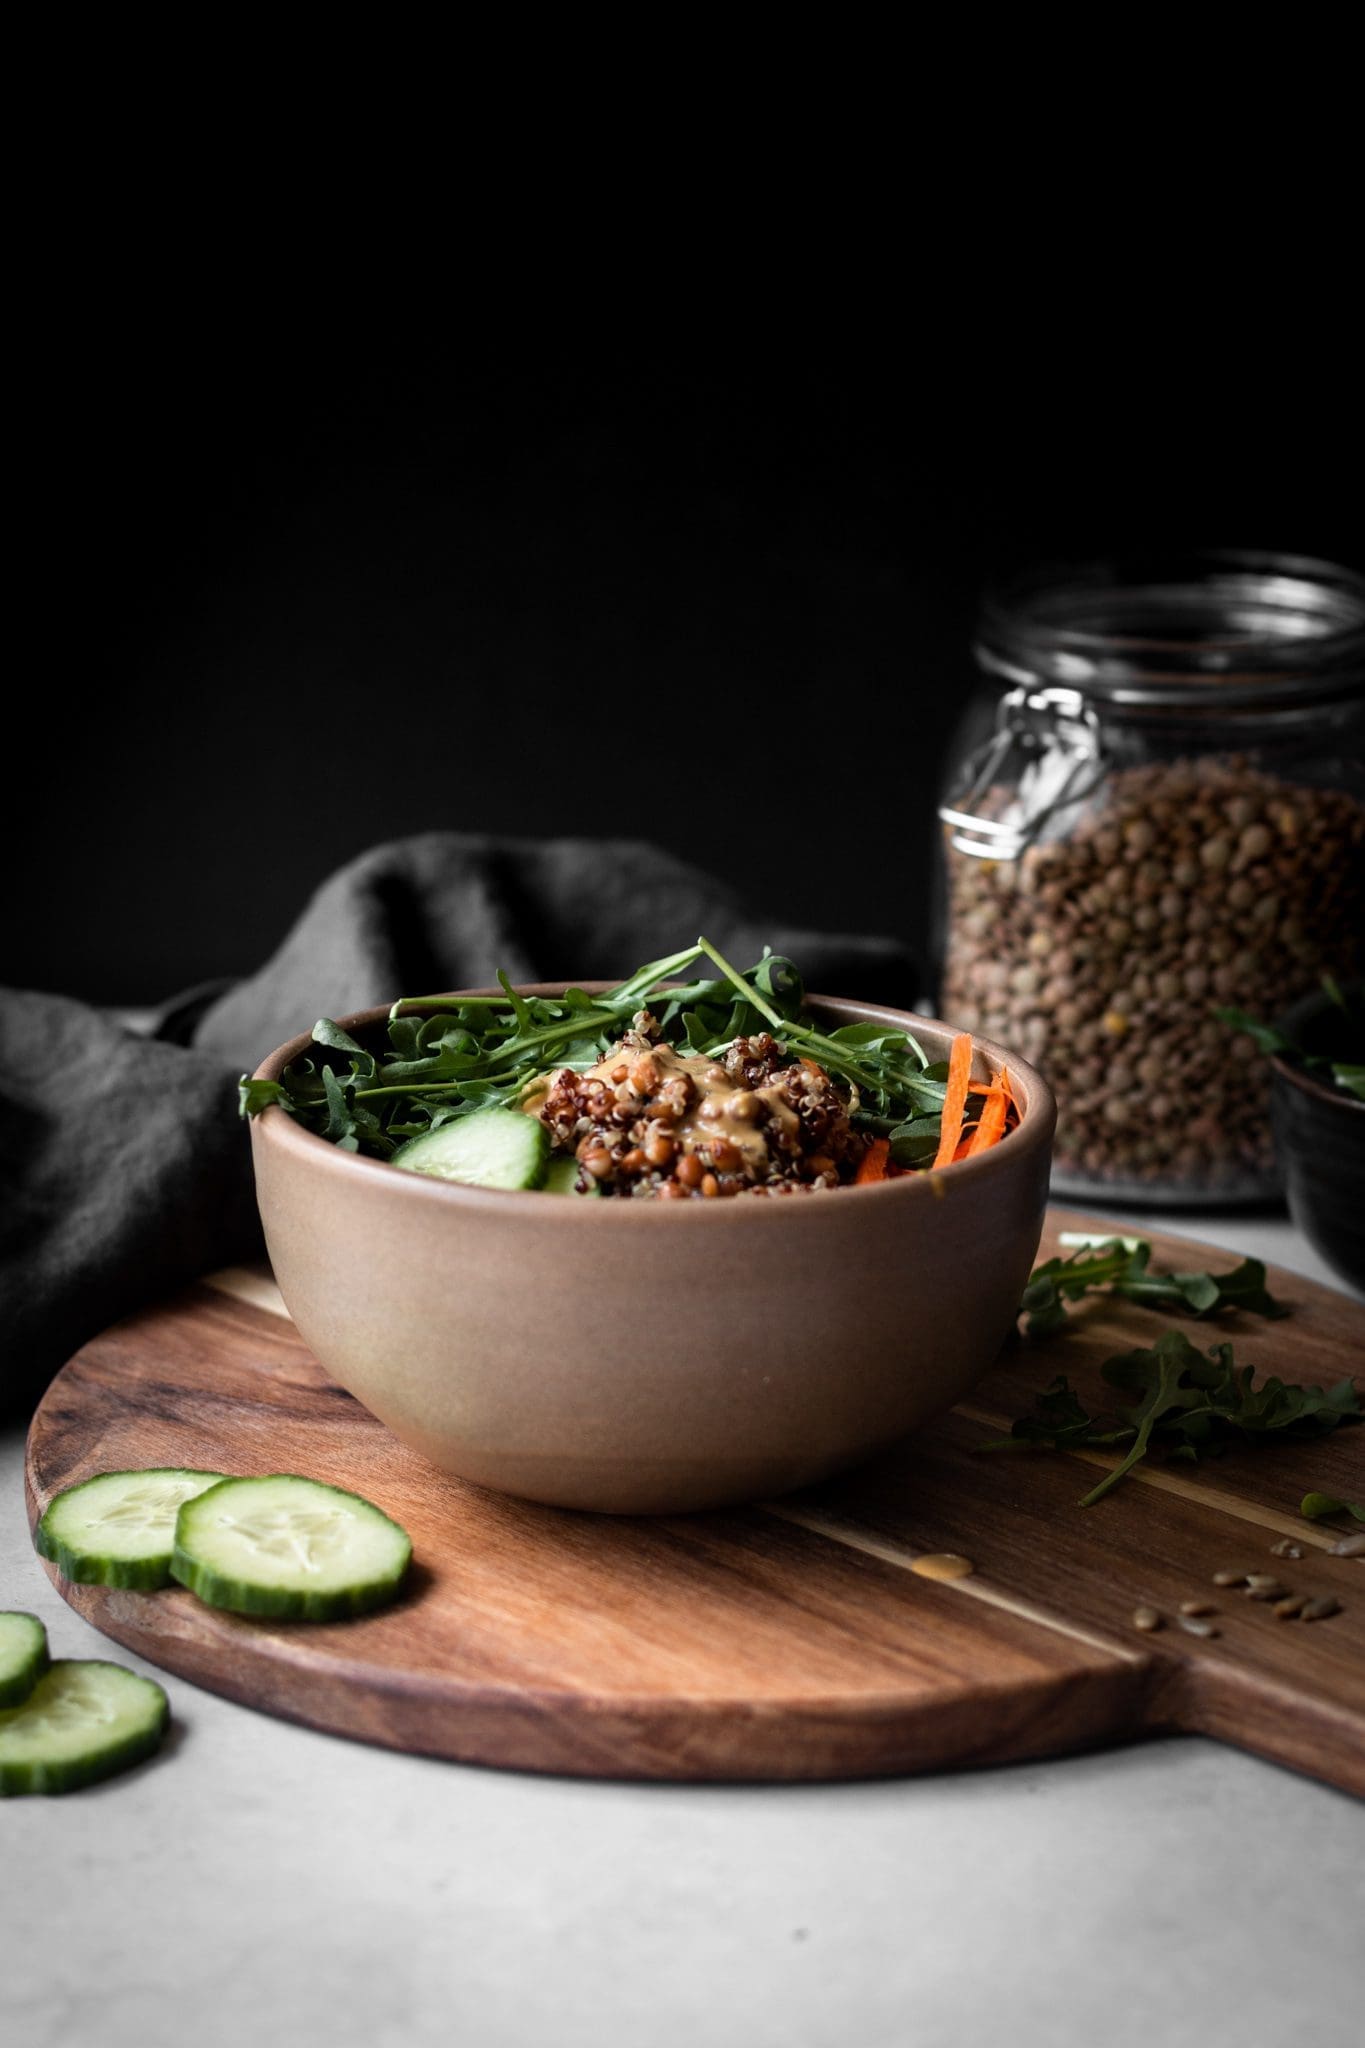 lentil quinoa salad in a bowl from the side